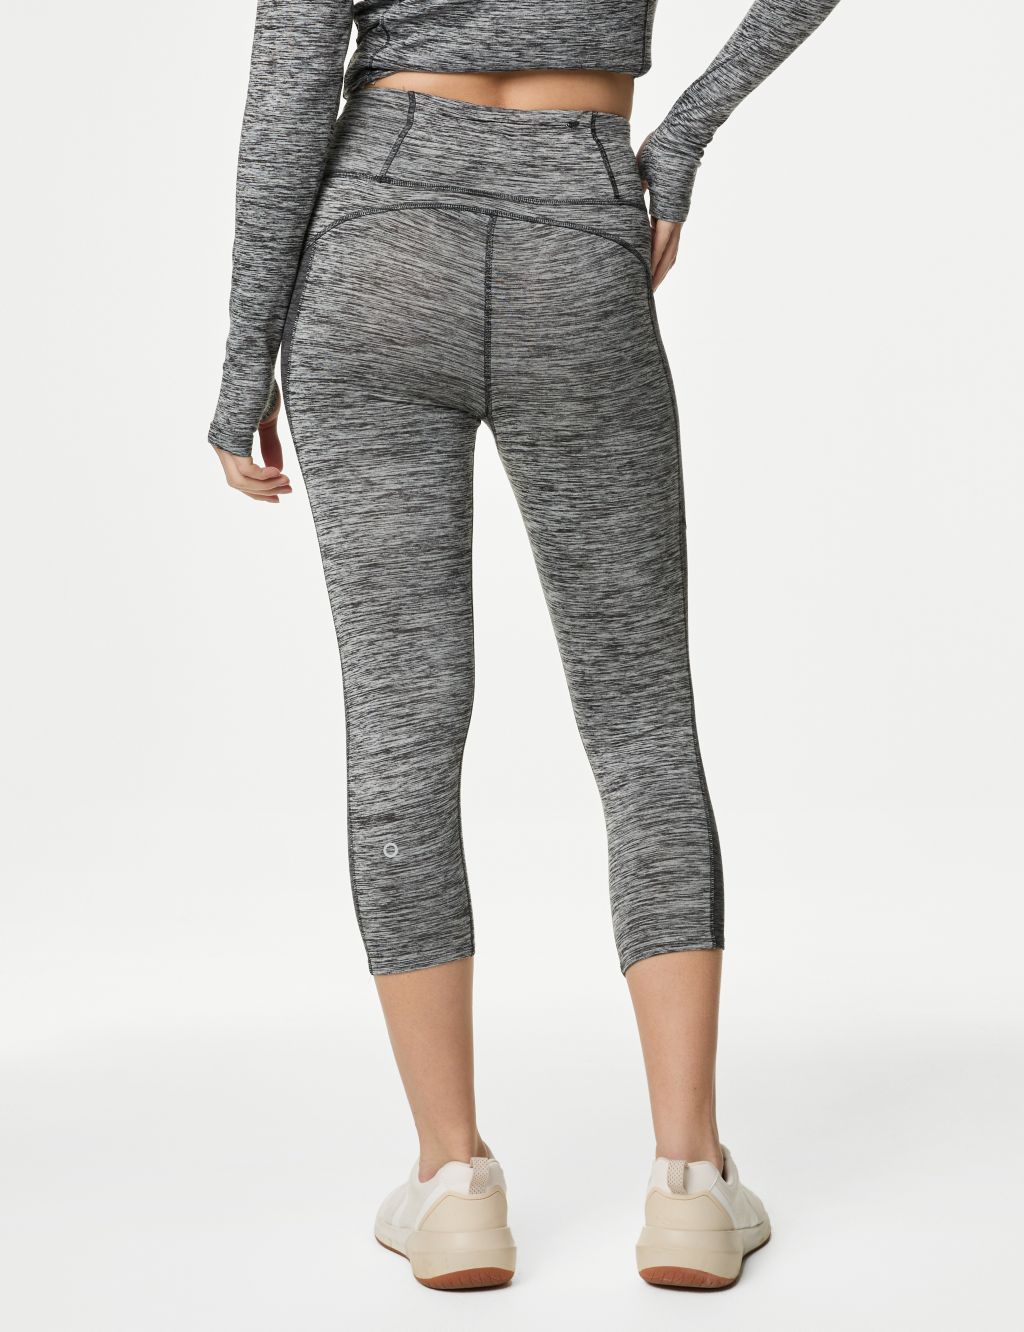 Go Move High Waisted Cropped Gym Leggings image 5